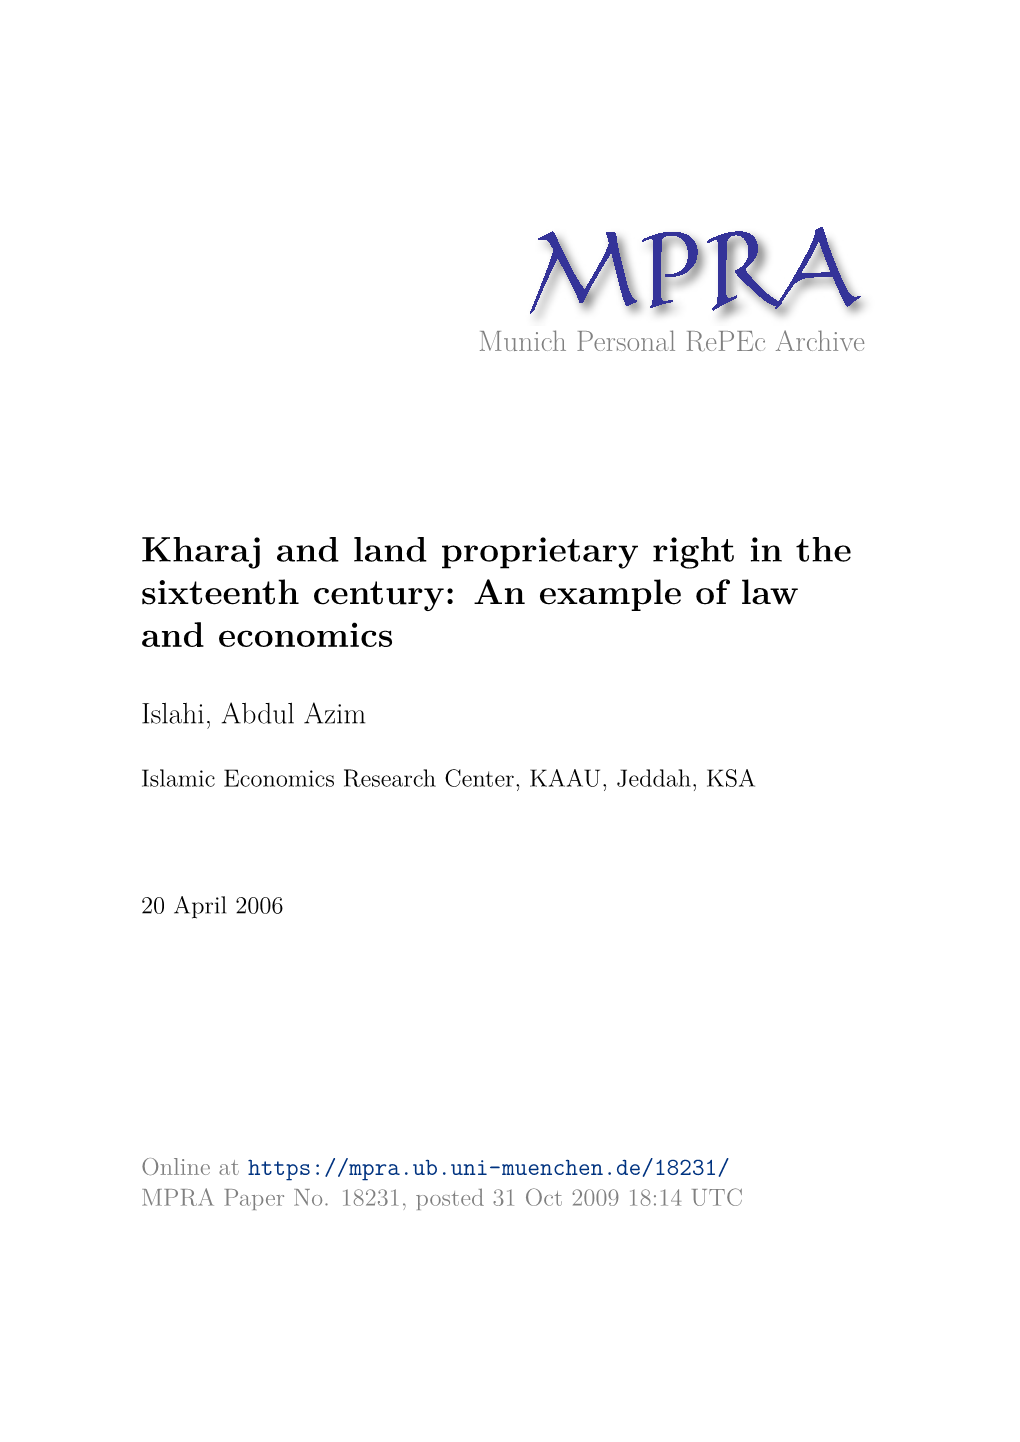 Kharaj and Land Proprietary Right in the Sixteenth Century: an Example of Law and Economics